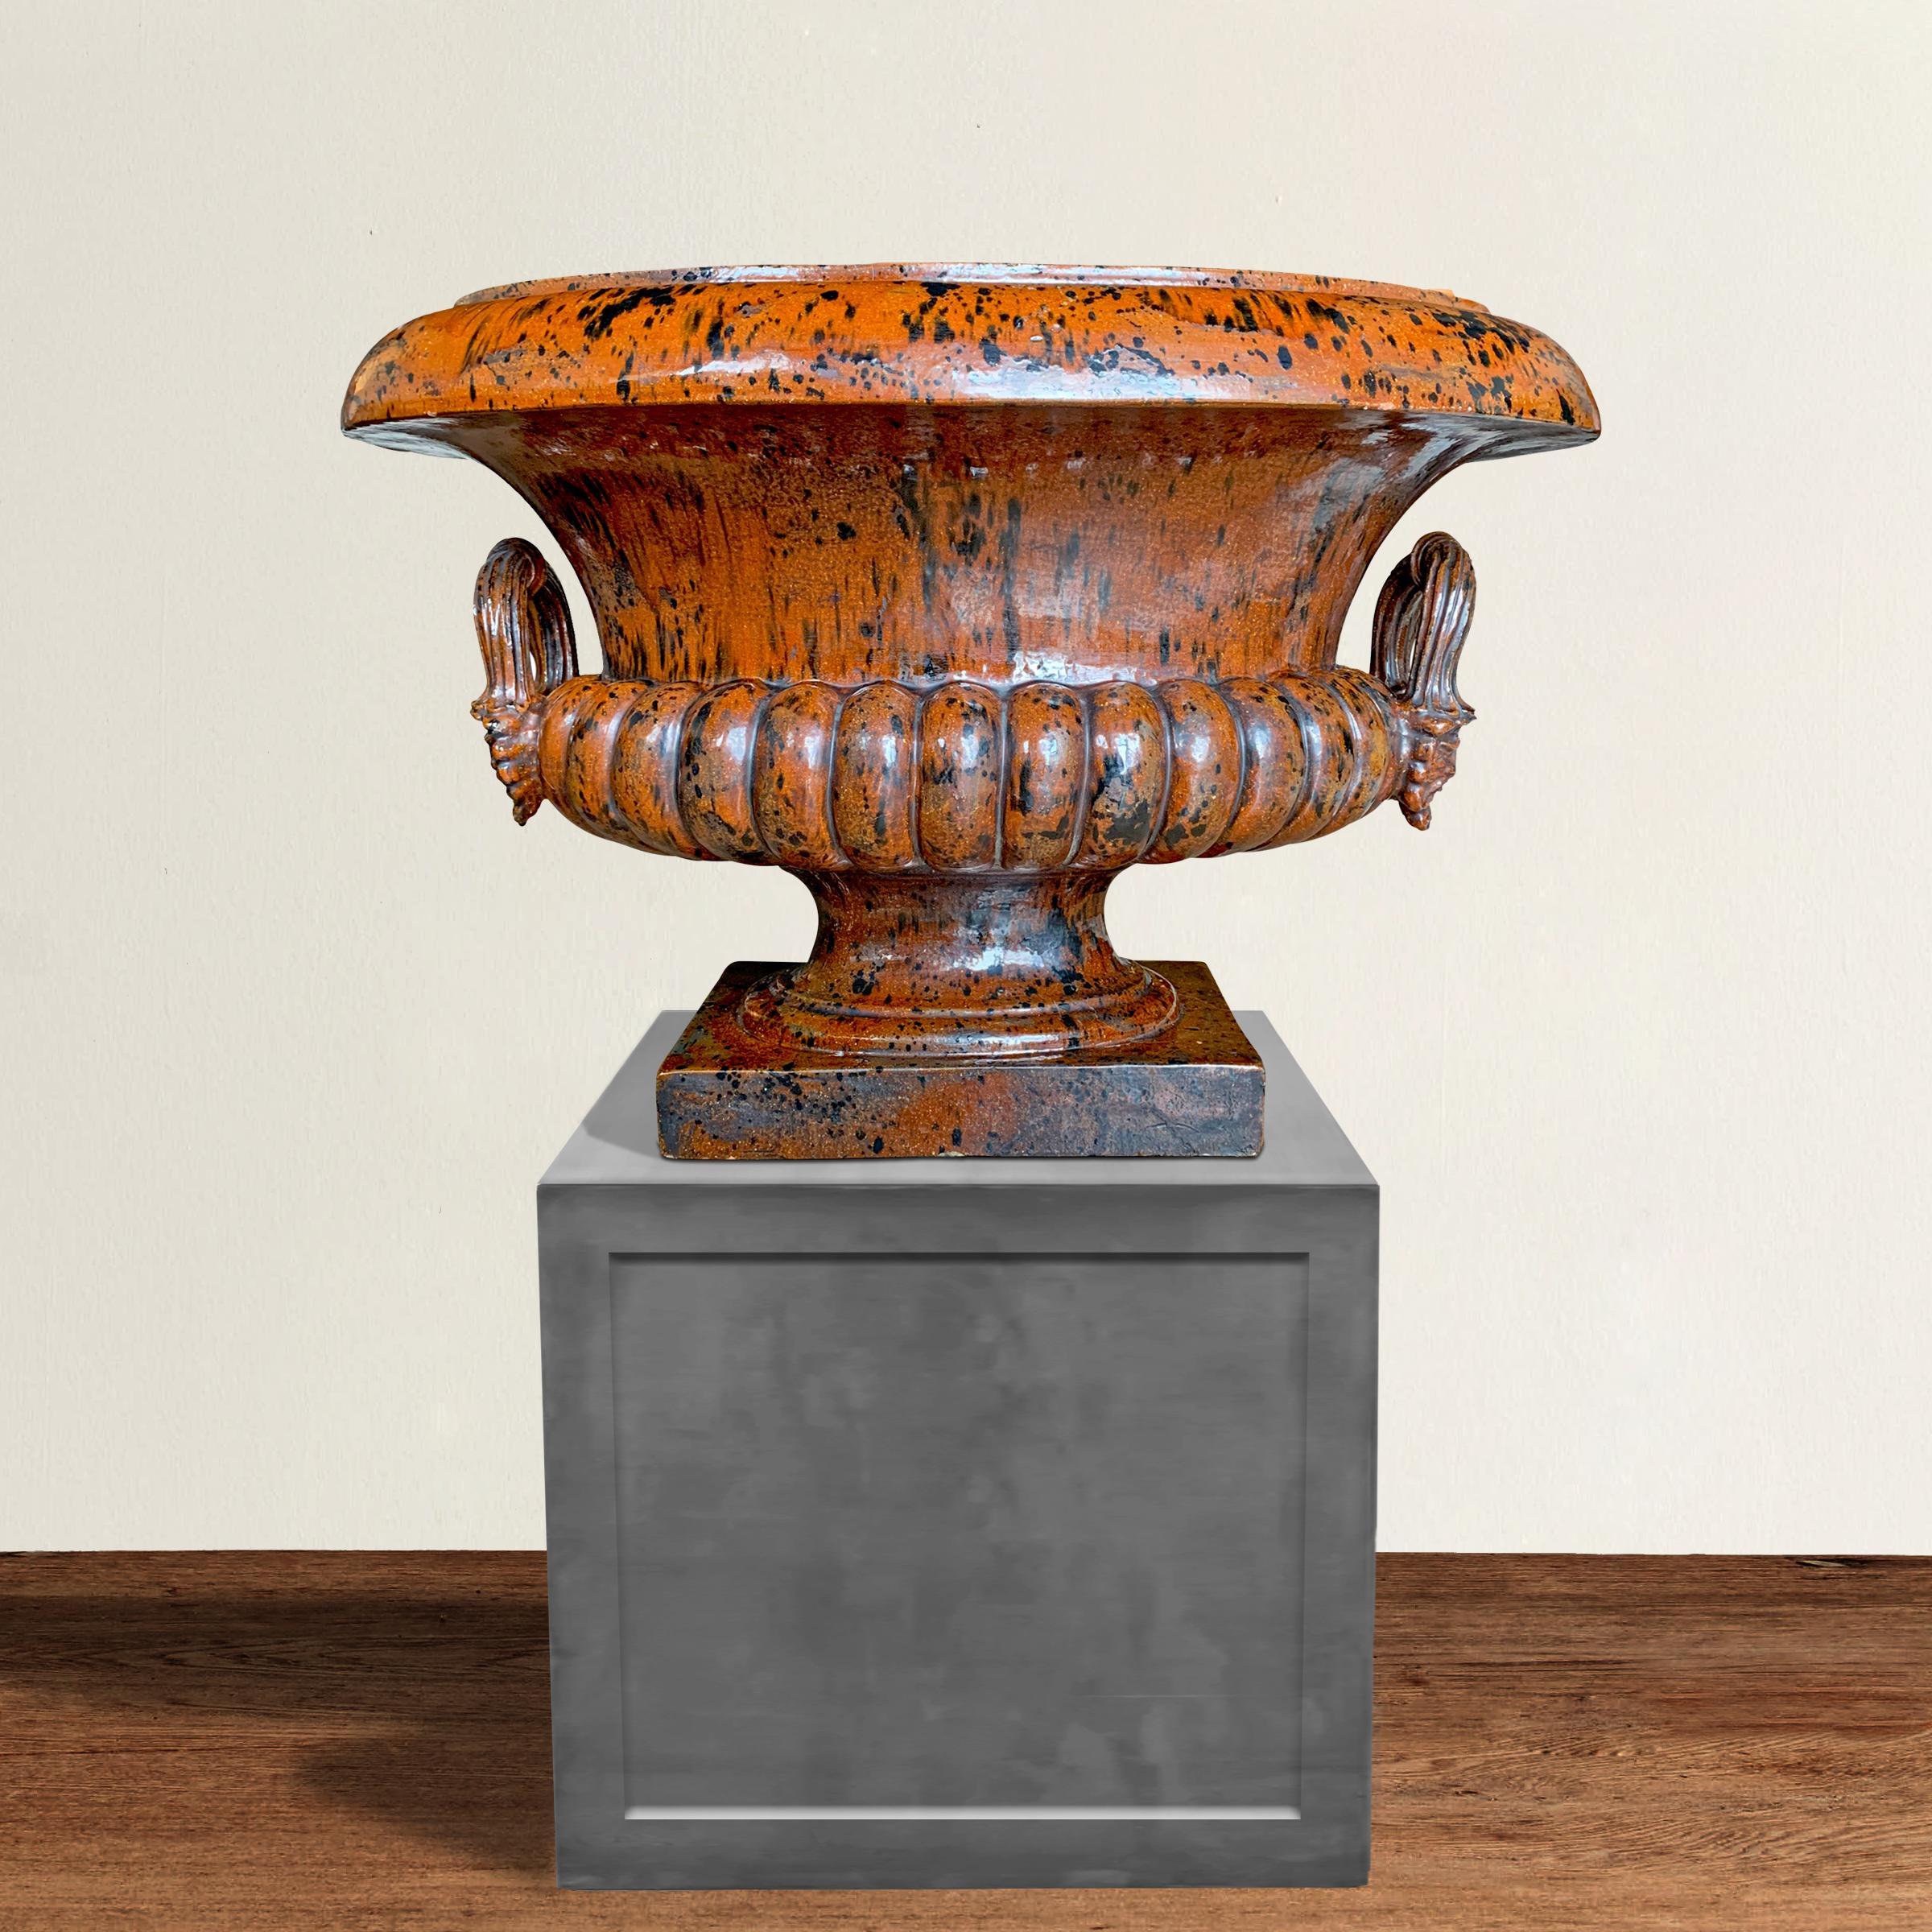 A fantastic monumental Italian mid-20th century tortoise shell glazed ceramic urn of classical form with a thick lip, fluted body, narrow foot, and two applied handles each with two bearded faces. Perfect on its own, or planted with ferns or orchids